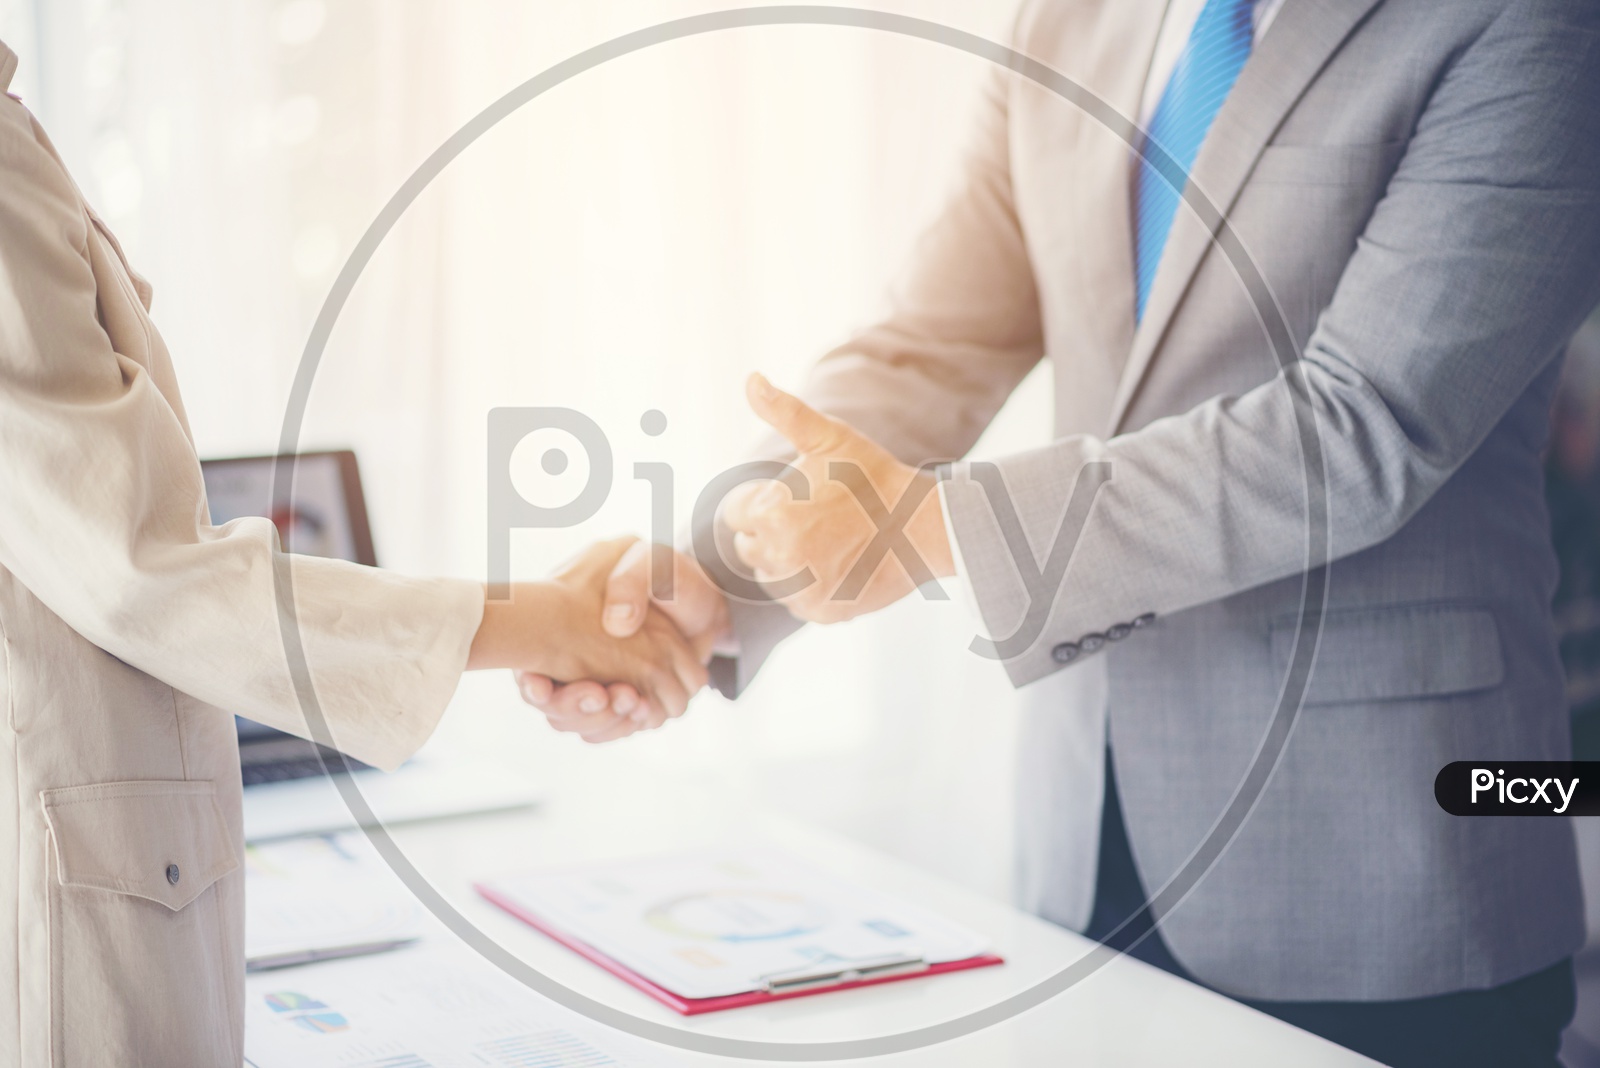 Businessmen shaking hands as a sign of approval